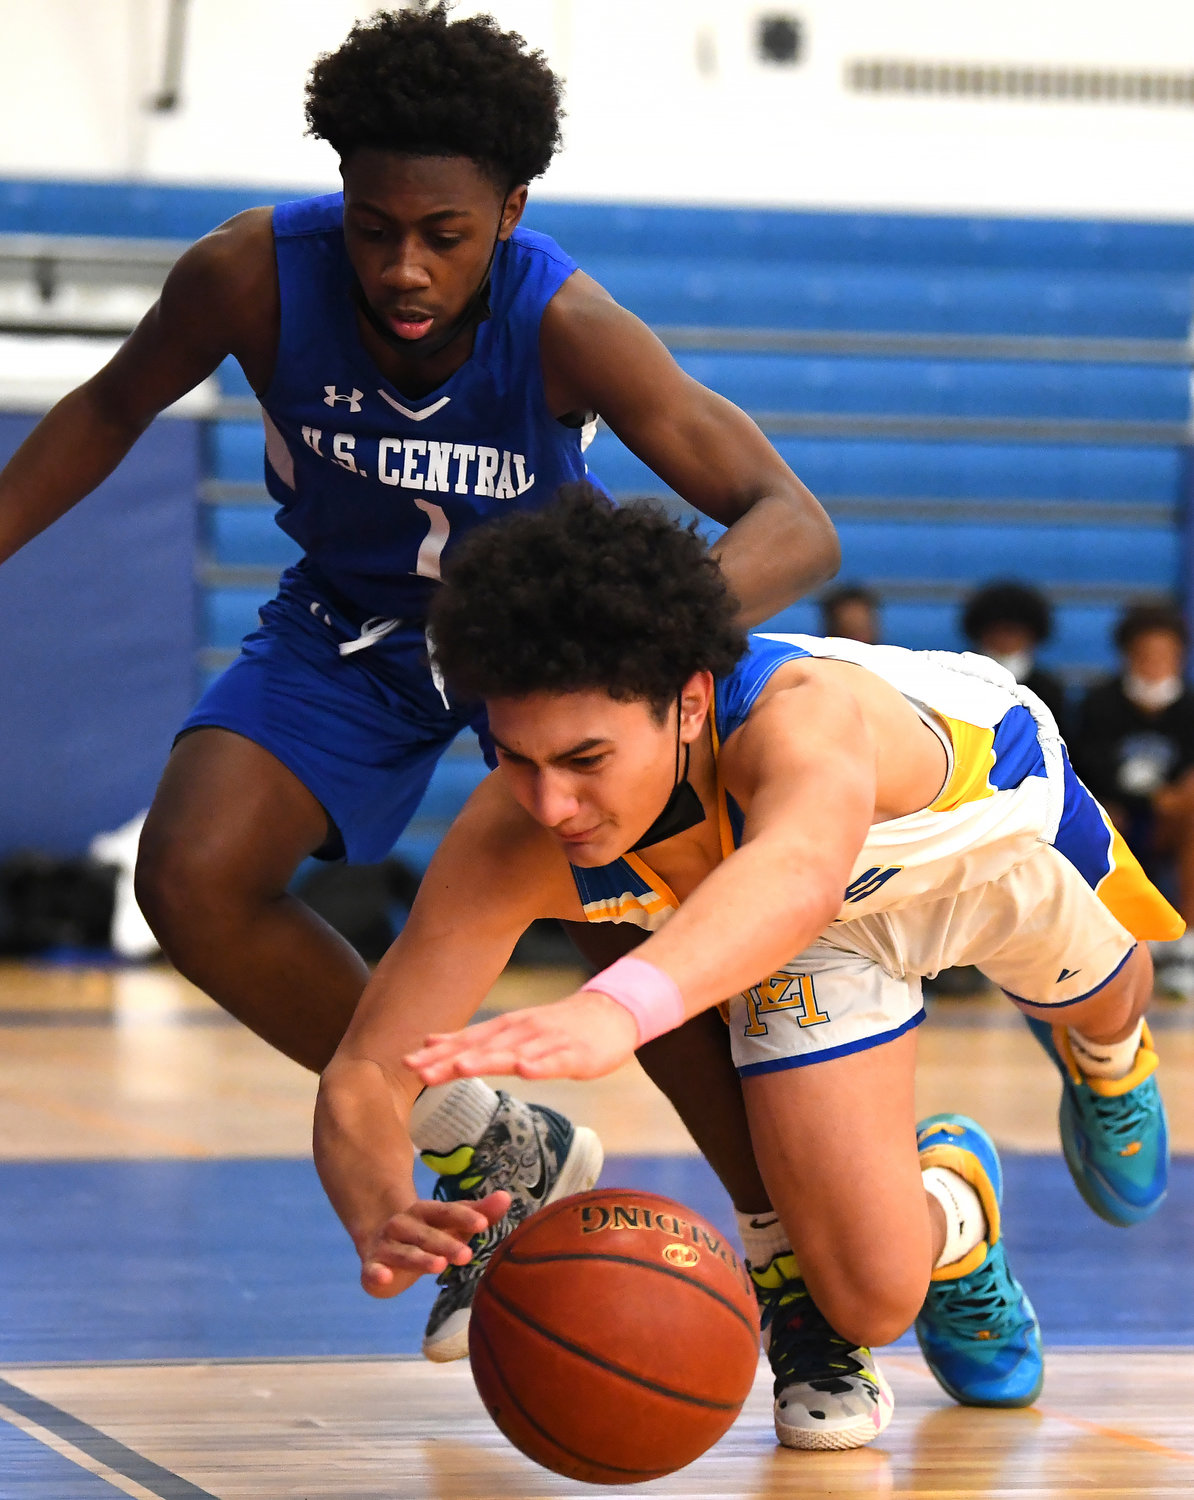 East Meadow's Jayden Henriquez, right, lunged for a loose ball ahead of Valley Stream Central's Dylan Madden during the Jets' win last Saturday.